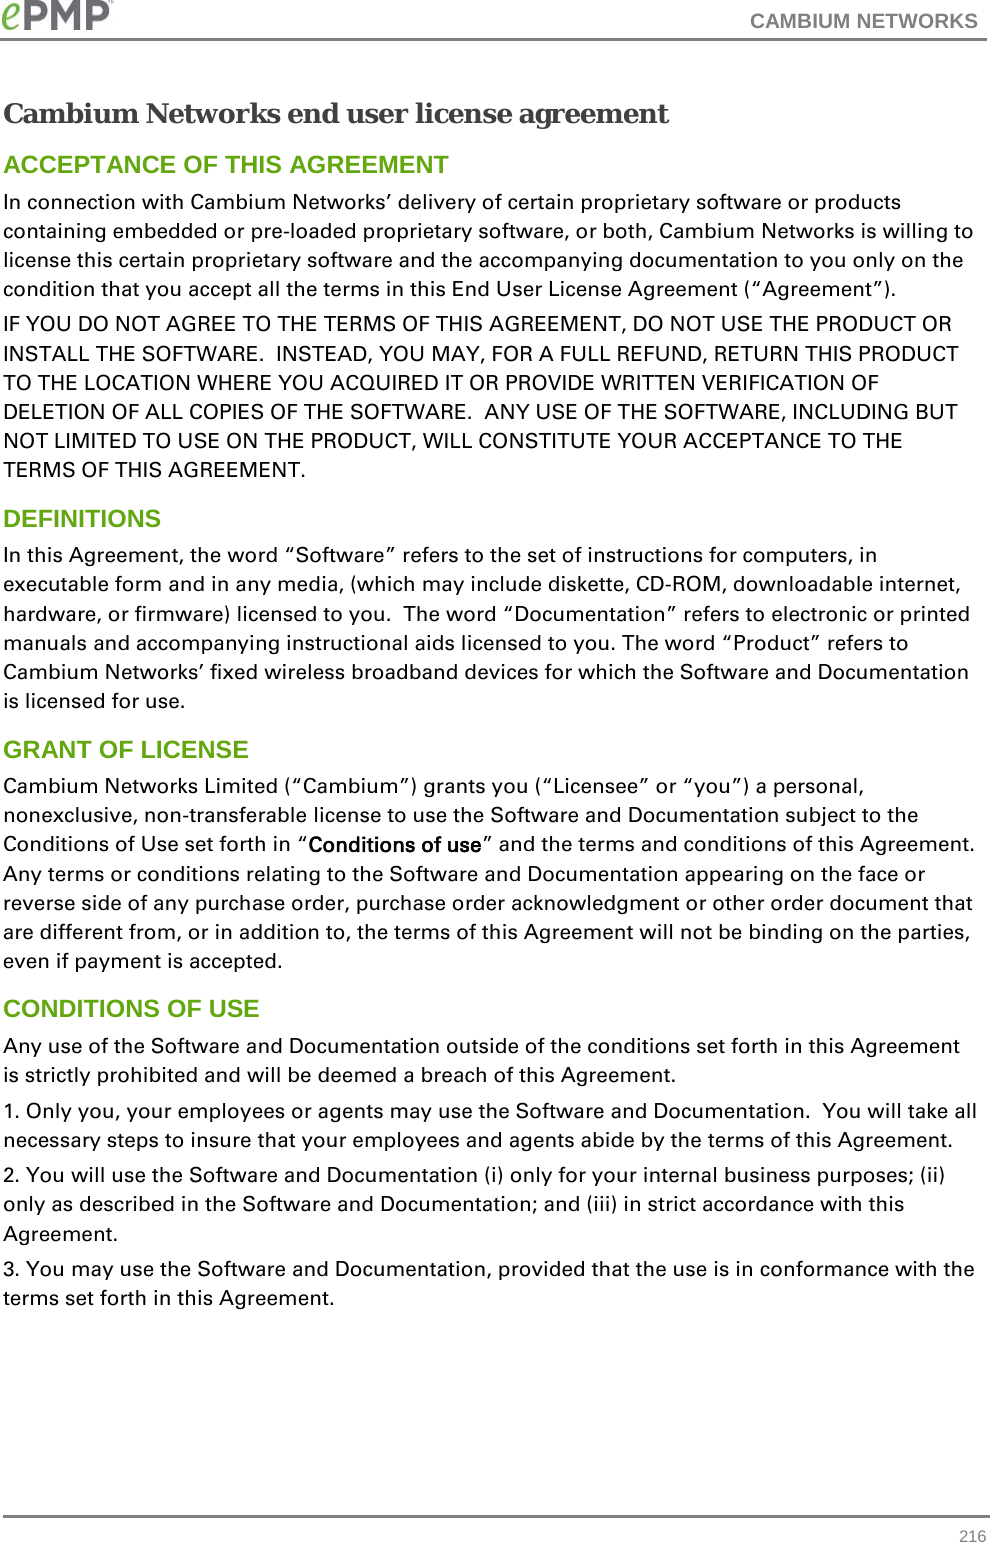 CAMBIUM NETWORKS  Cambium Networks end user license agreement ACCEPTANCE OF THIS AGREEMENT In connection with Cambium Networks’ delivery of certain proprietary software or products containing embedded or pre-loaded proprietary software, or both, Cambium Networks is willing to license this certain proprietary software and the accompanying documentation to you only on the condition that you accept all the terms in this End User License Agreement (“Agreement”). IF YOU DO NOT AGREE TO THE TERMS OF THIS AGREEMENT, DO NOT USE THE PRODUCT OR INSTALL THE SOFTWARE.  INSTEAD, YOU MAY, FOR A FULL REFUND, RETURN THIS PRODUCT TO THE LOCATION WHERE YOU ACQUIRED IT OR PROVIDE WRITTEN VERIFICATION OF DELETION OF ALL COPIES OF THE SOFTWARE.  ANY USE OF THE SOFTWARE, INCLUDING BUT NOT LIMITED TO USE ON THE PRODUCT, WILL CONSTITUTE YOUR ACCEPTANCE TO THE TERMS OF THIS AGREEMENT.  DEFINITIONS In this Agreement, the word “Software” refers to the set of instructions for computers, in executable form and in any media, (which may include diskette, CD-ROM, downloadable internet, hardware, or firmware) licensed to you.  The word “Documentation” refers to electronic or printed manuals and accompanying instructional aids licensed to you. The word “Product” refers to Cambium Networks’ fixed wireless broadband devices for which the Software and Documentation is licensed for use. GRANT OF LICENSE Cambium Networks Limited (“Cambium”) grants you (“Licensee” or “you”) a personal, nonexclusive, non-transferable license to use the Software and Documentation subject to the Conditions of Use set forth in “Conditions of use” and the terms and conditions of this Agreement.  Any terms or conditions relating to the Software and Documentation appearing on the face or reverse side of any purchase order, purchase order acknowledgment or other order document that are different from, or in addition to, the terms of this Agreement will not be binding on the parties, even if payment is accepted. CONDITIONS OF USE Any use of the Software and Documentation outside of the conditions set forth in this Agreement is strictly prohibited and will be deemed a breach of this Agreement.  1. Only you, your employees or agents may use the Software and Documentation.  You will take all necessary steps to insure that your employees and agents abide by the terms of this Agreement. 2. You will use the Software and Documentation (i) only for your internal business purposes; (ii) only as described in the Software and Documentation; and (iii) in strict accordance with this Agreement. 3. You may use the Software and Documentation, provided that the use is in conformance with the terms set forth in this Agreement.     216 